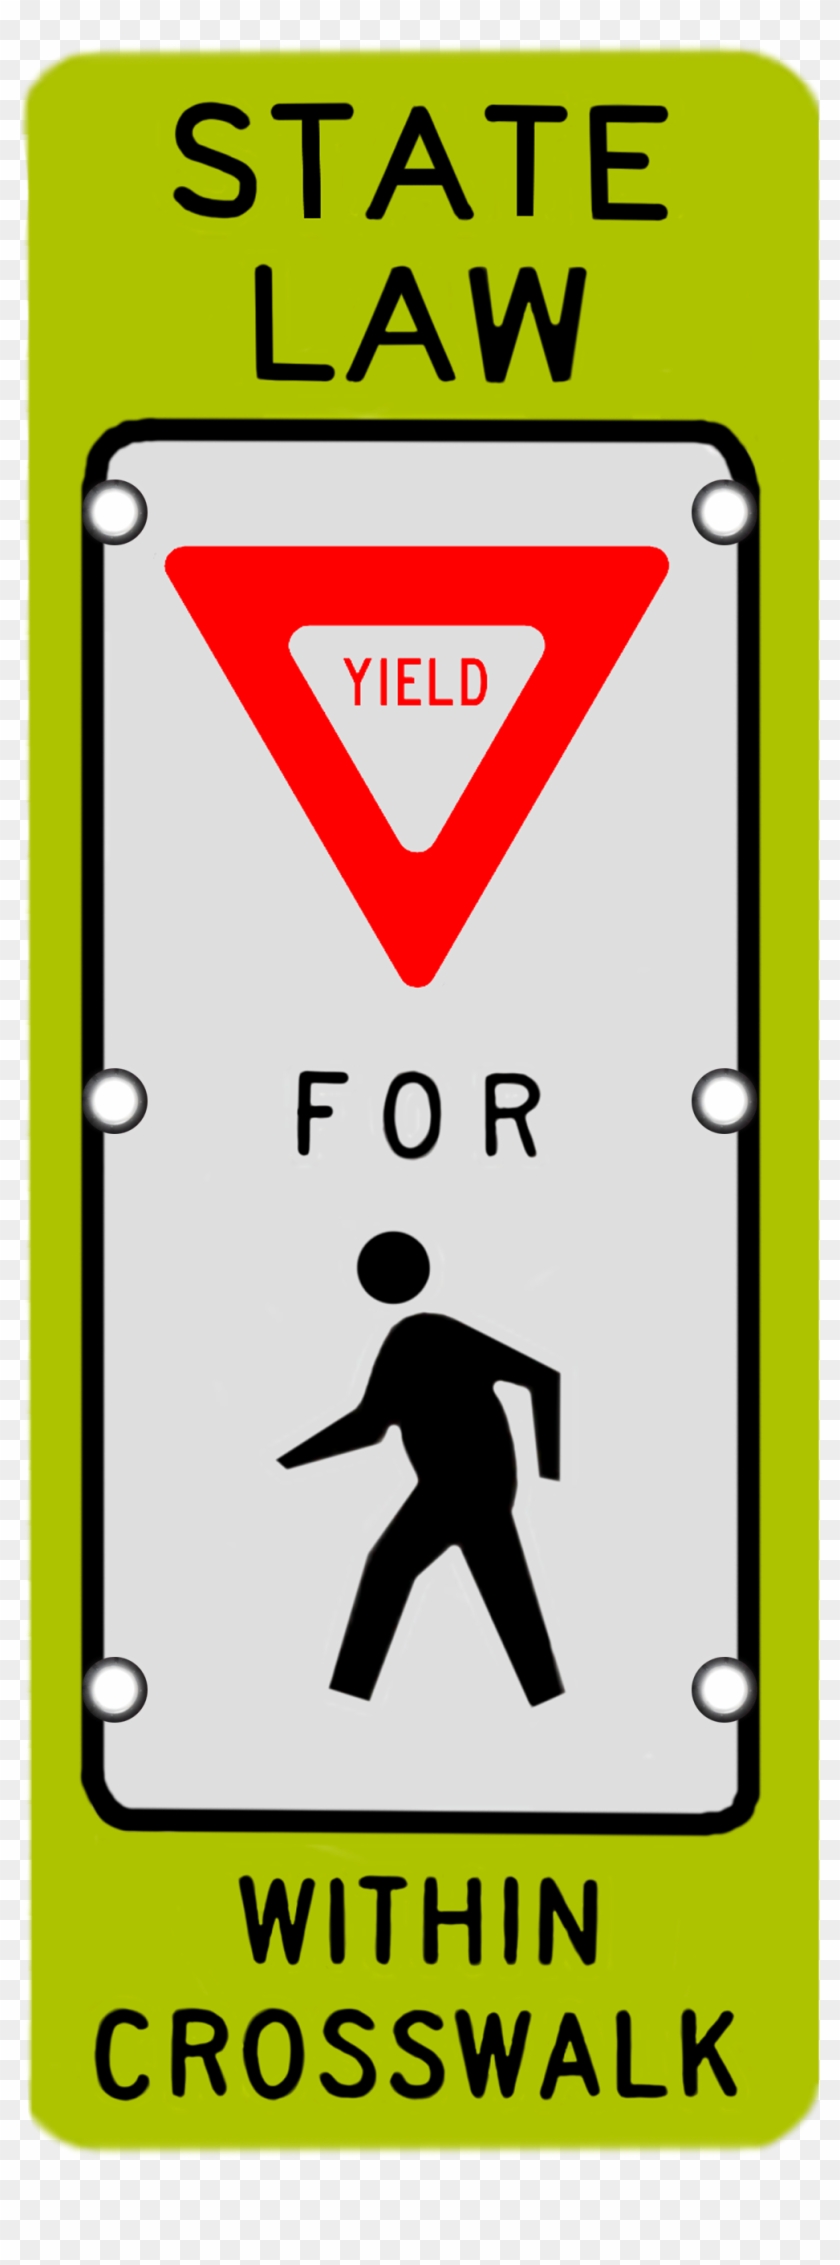 Image Logo For Lighted Roadway Signs - Yield For Pedestrians Sign Clipart #3628165